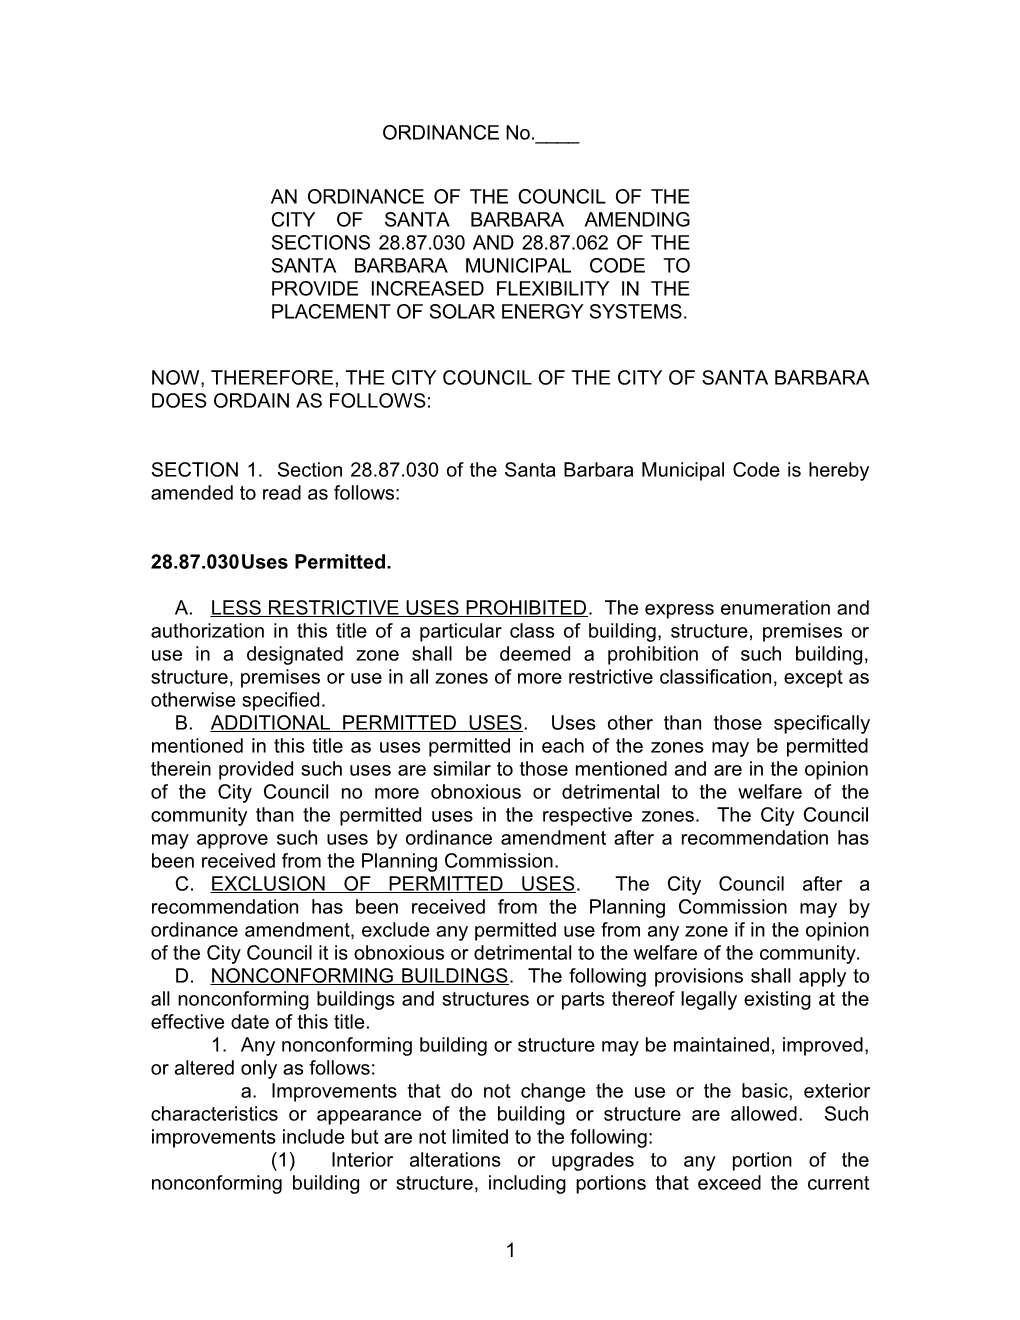 An Ordinance of the Council of the City of Santa Barbara Amending Sections 28.87.030 And